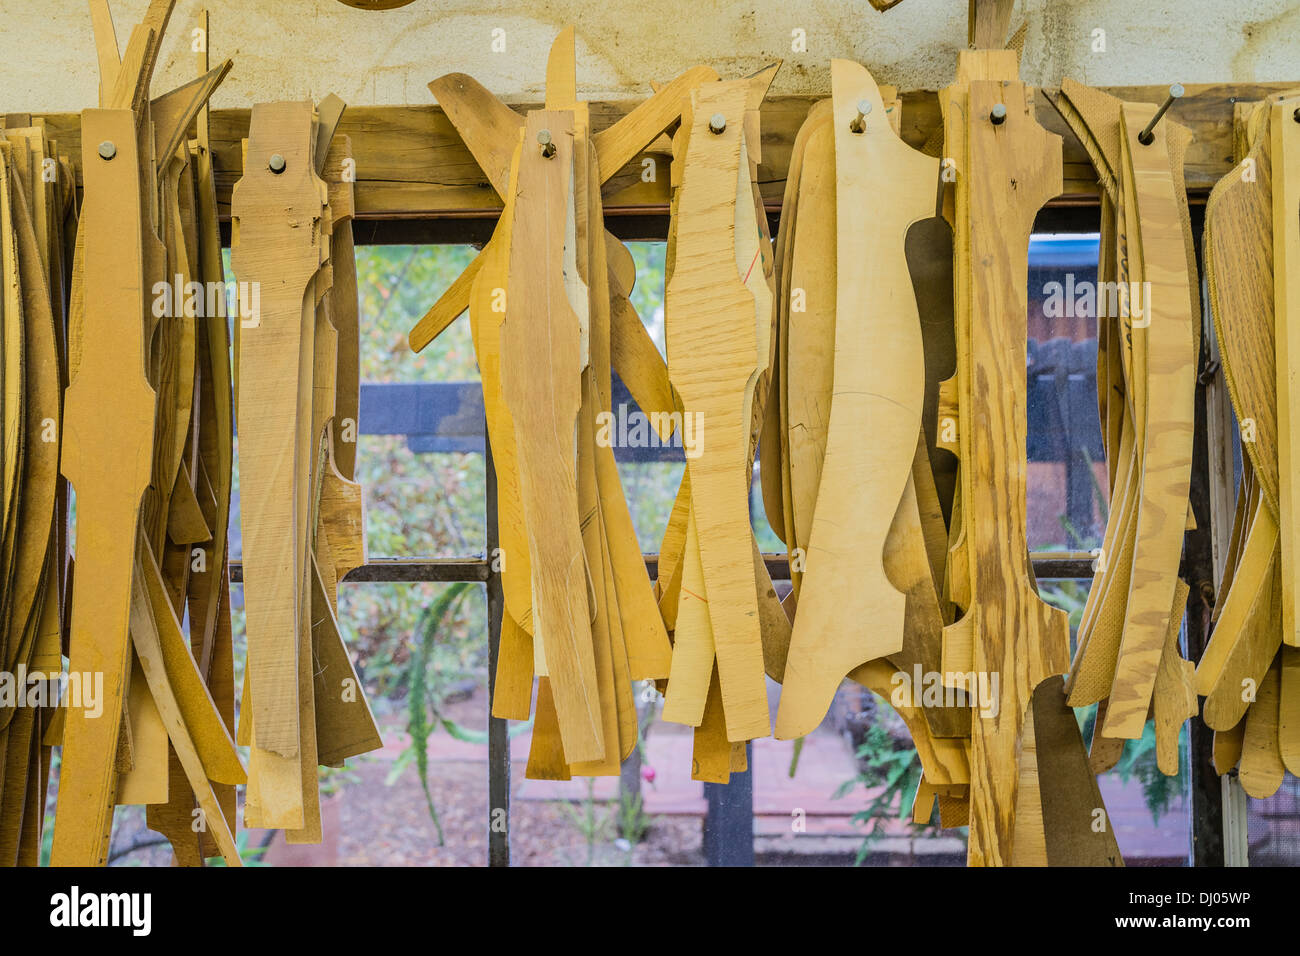 Wooden templates in Sam Maloof's shop of the famous artist/woodworker Sam Maloof. Stock Photo